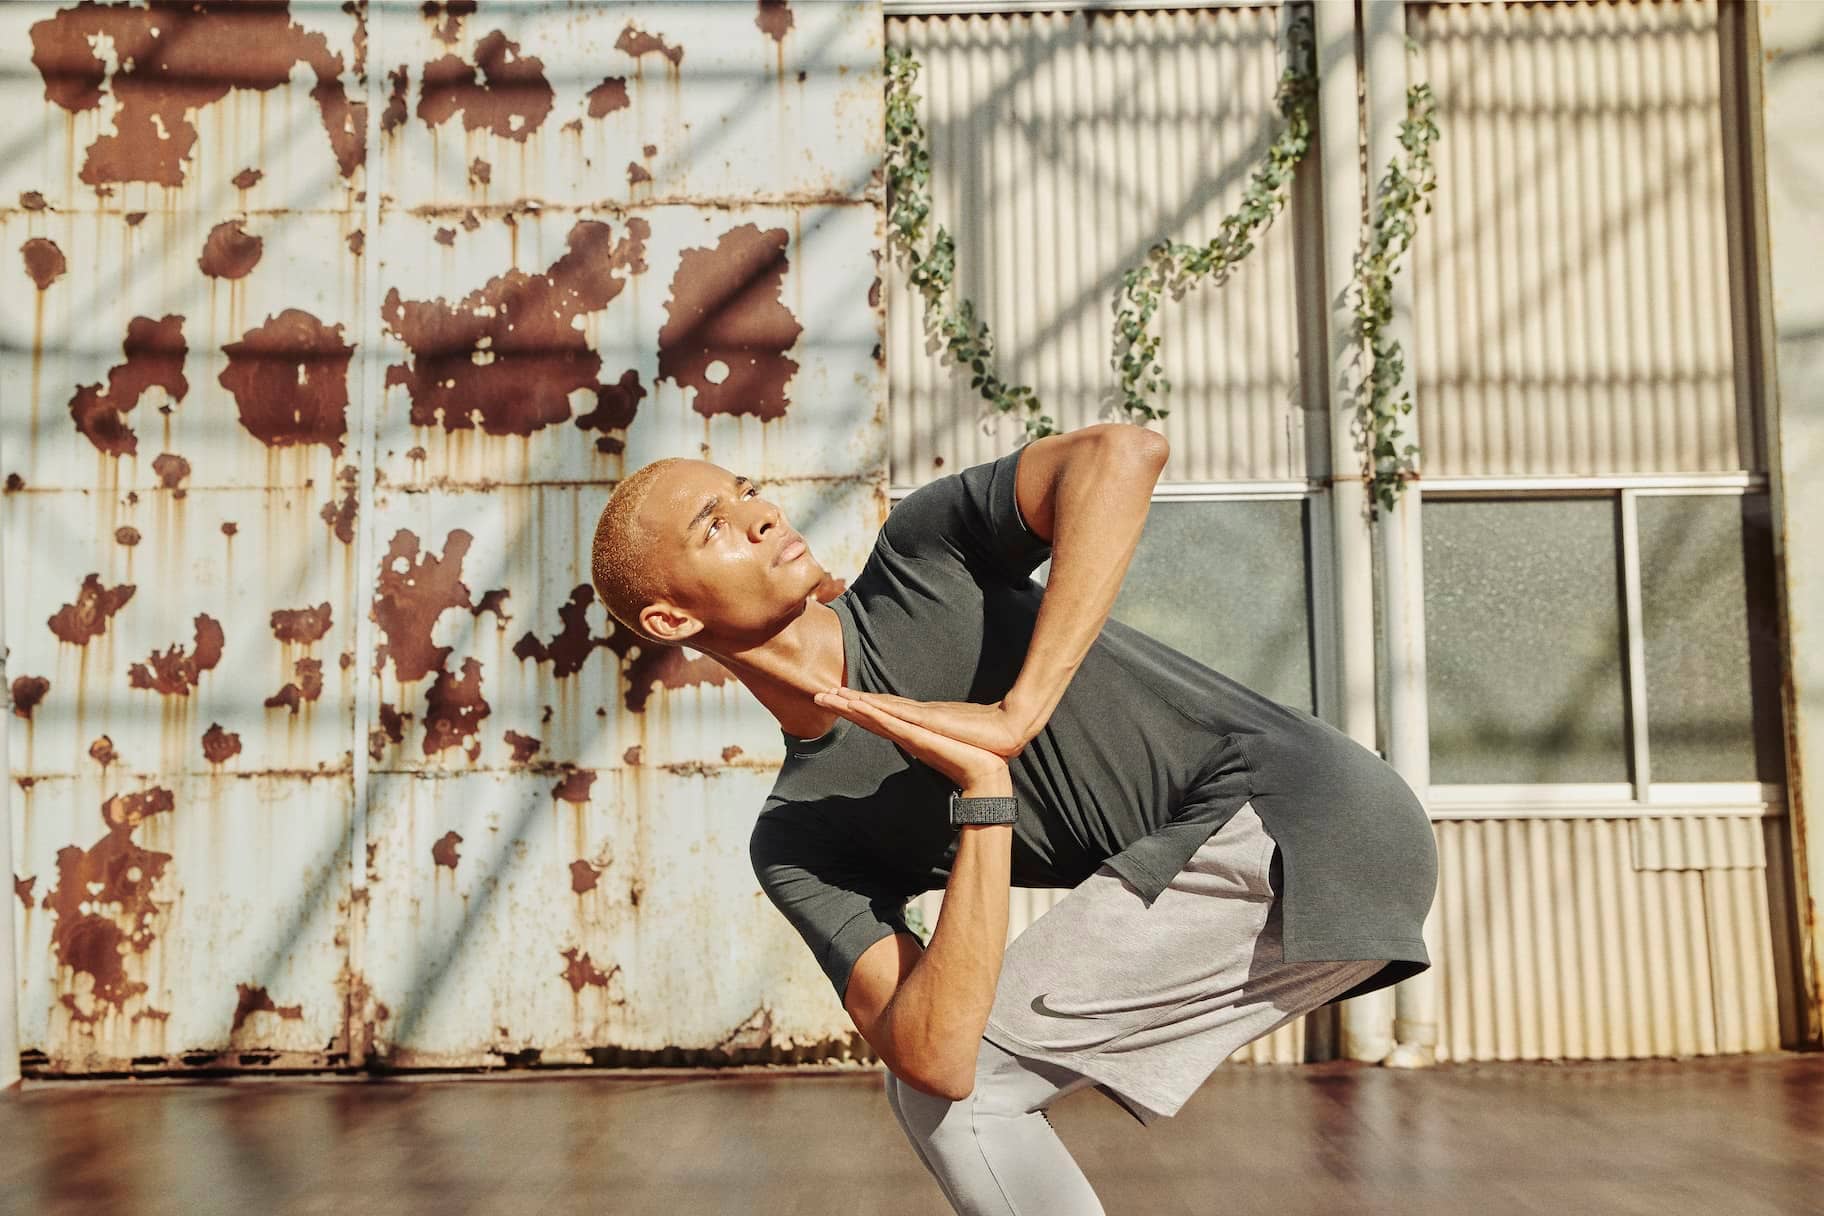 The Top 3 Yoga Poses To Get Stronger, According to Experts. Nike SK